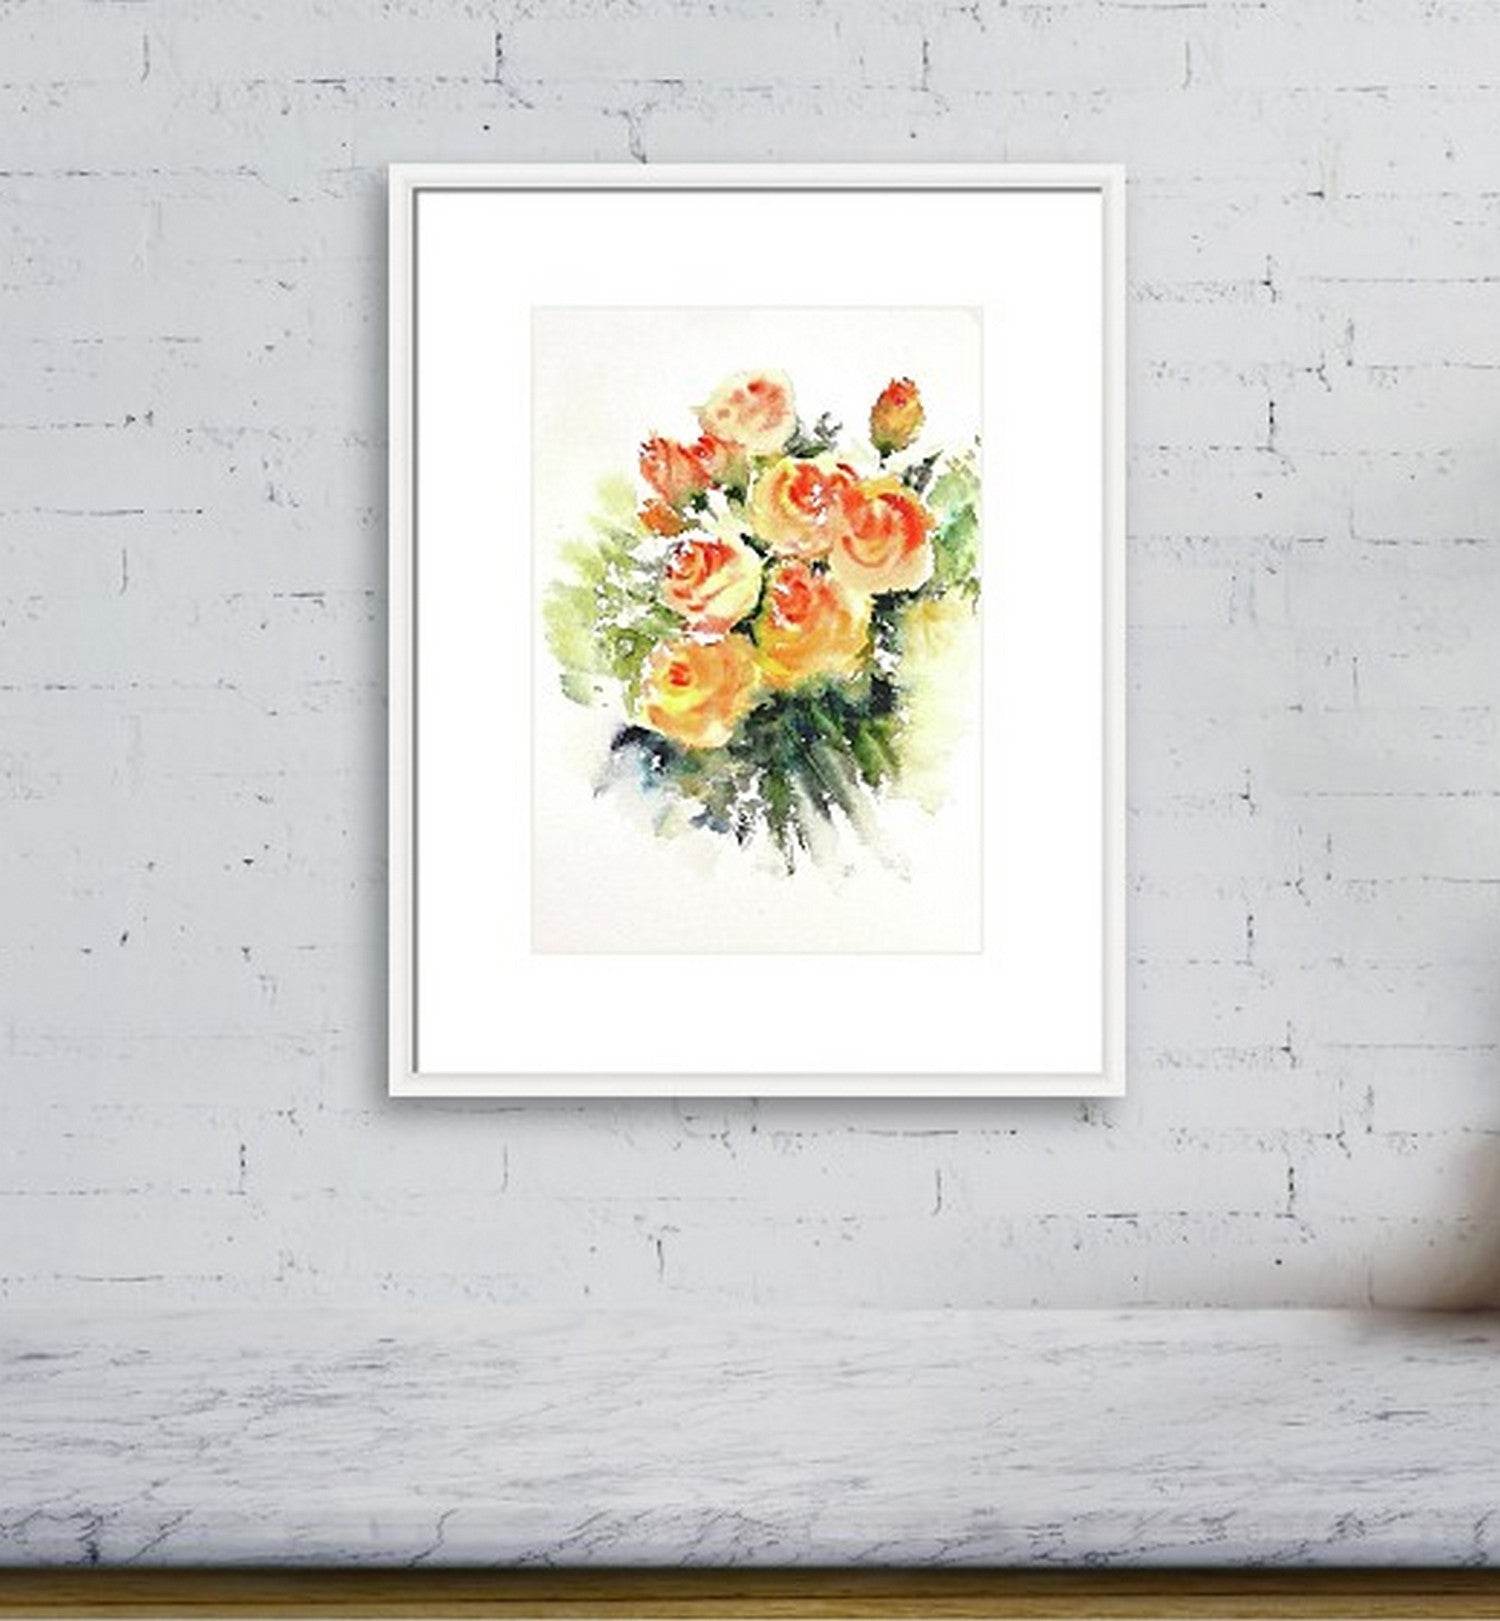 Virtual frame view of Bouquet of cream and orange roses, watercolor painting